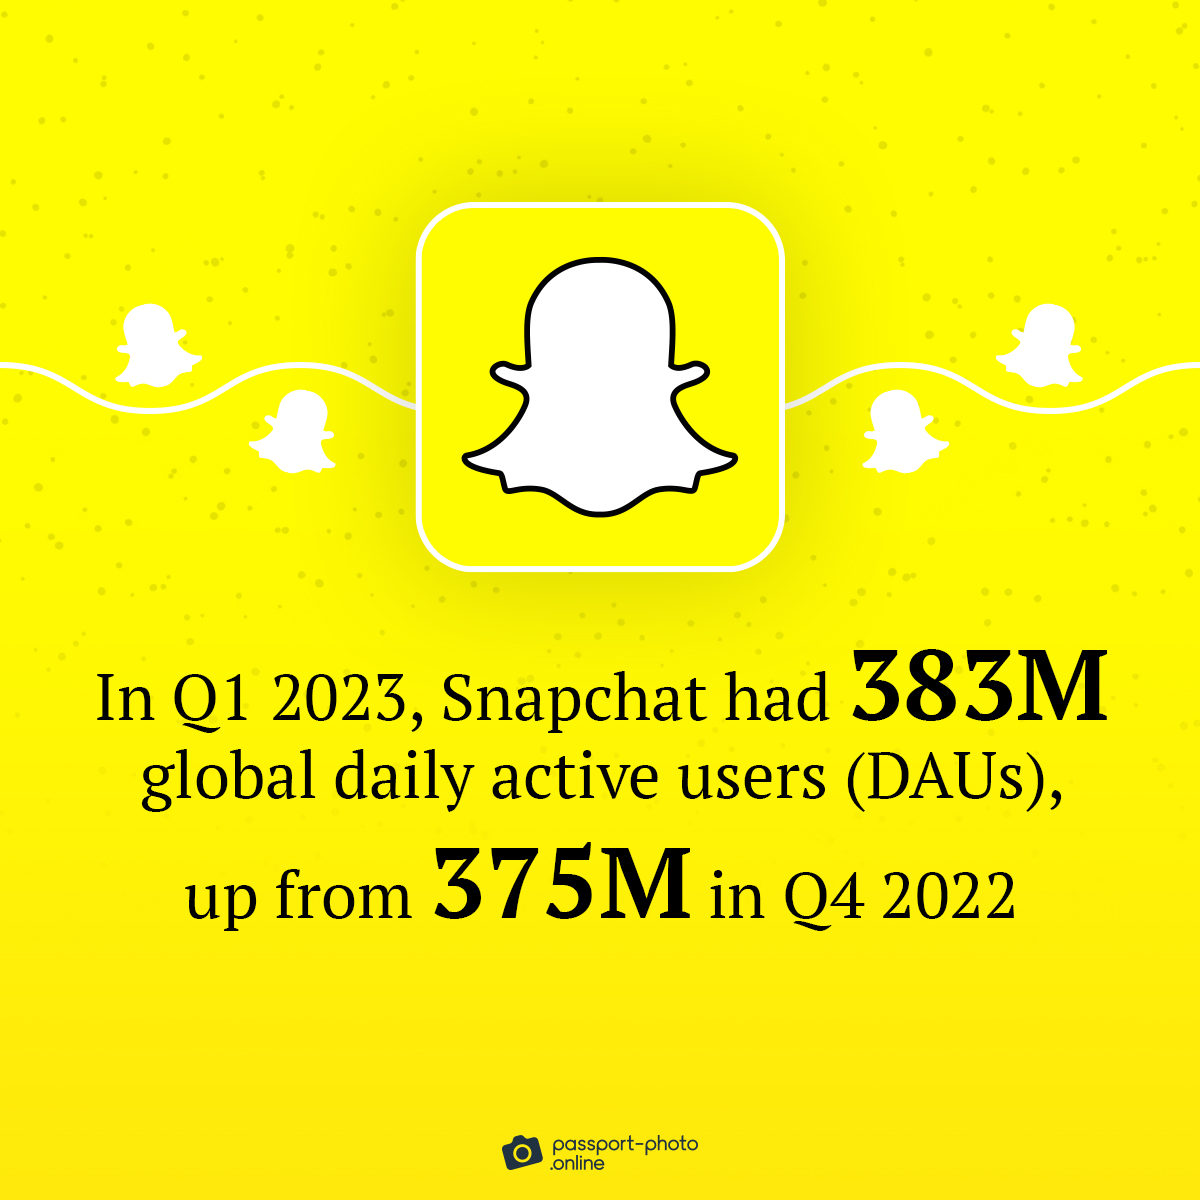 snapchat has 383M global daily active users